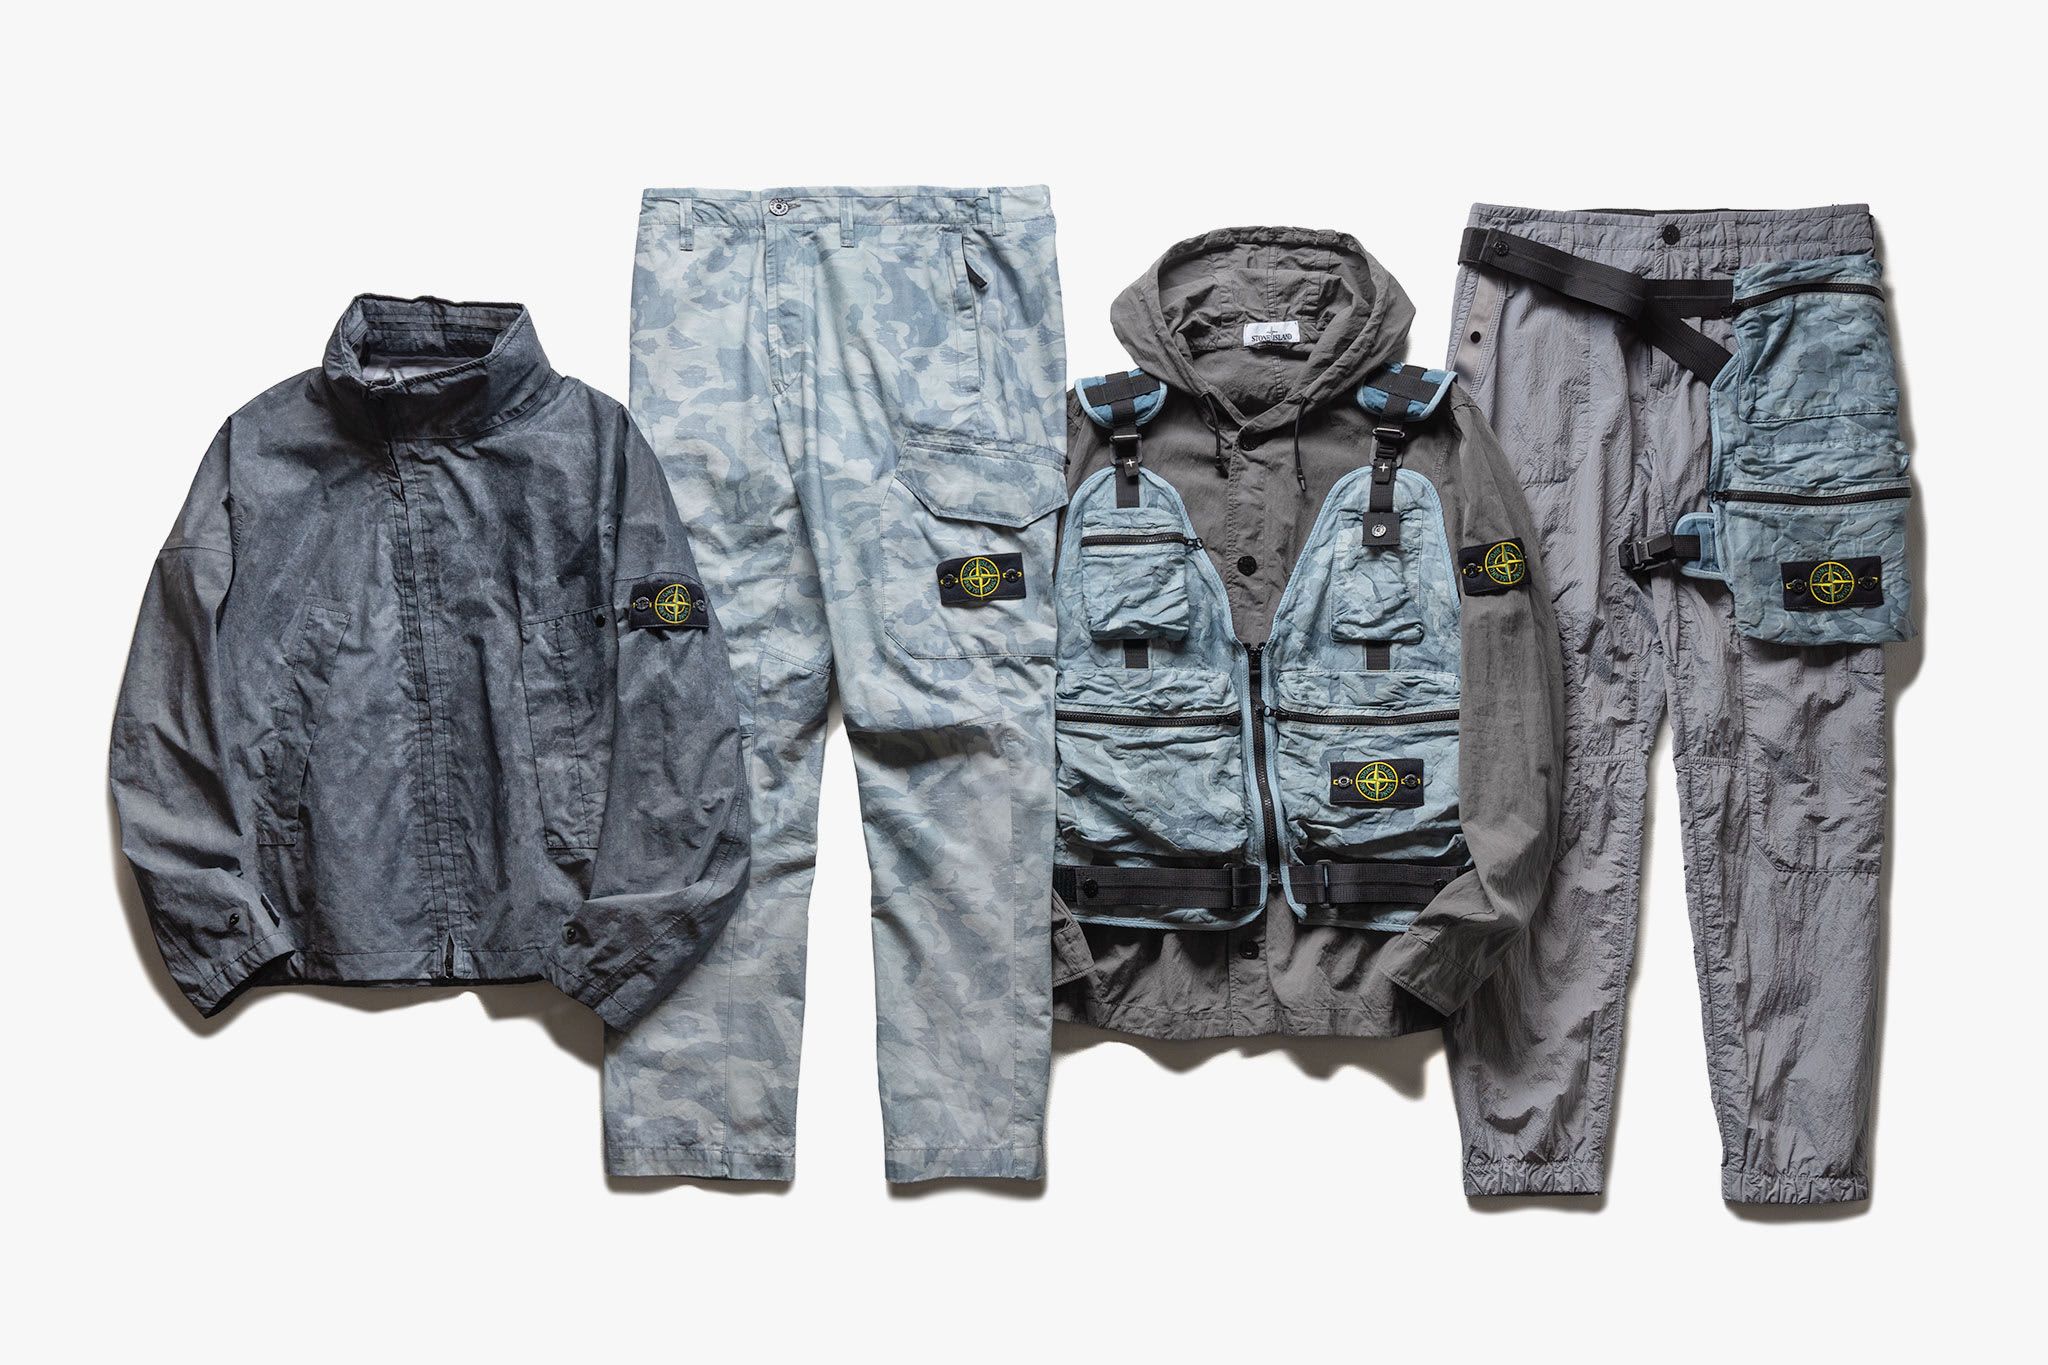 Available Now from Stone Island – Feature